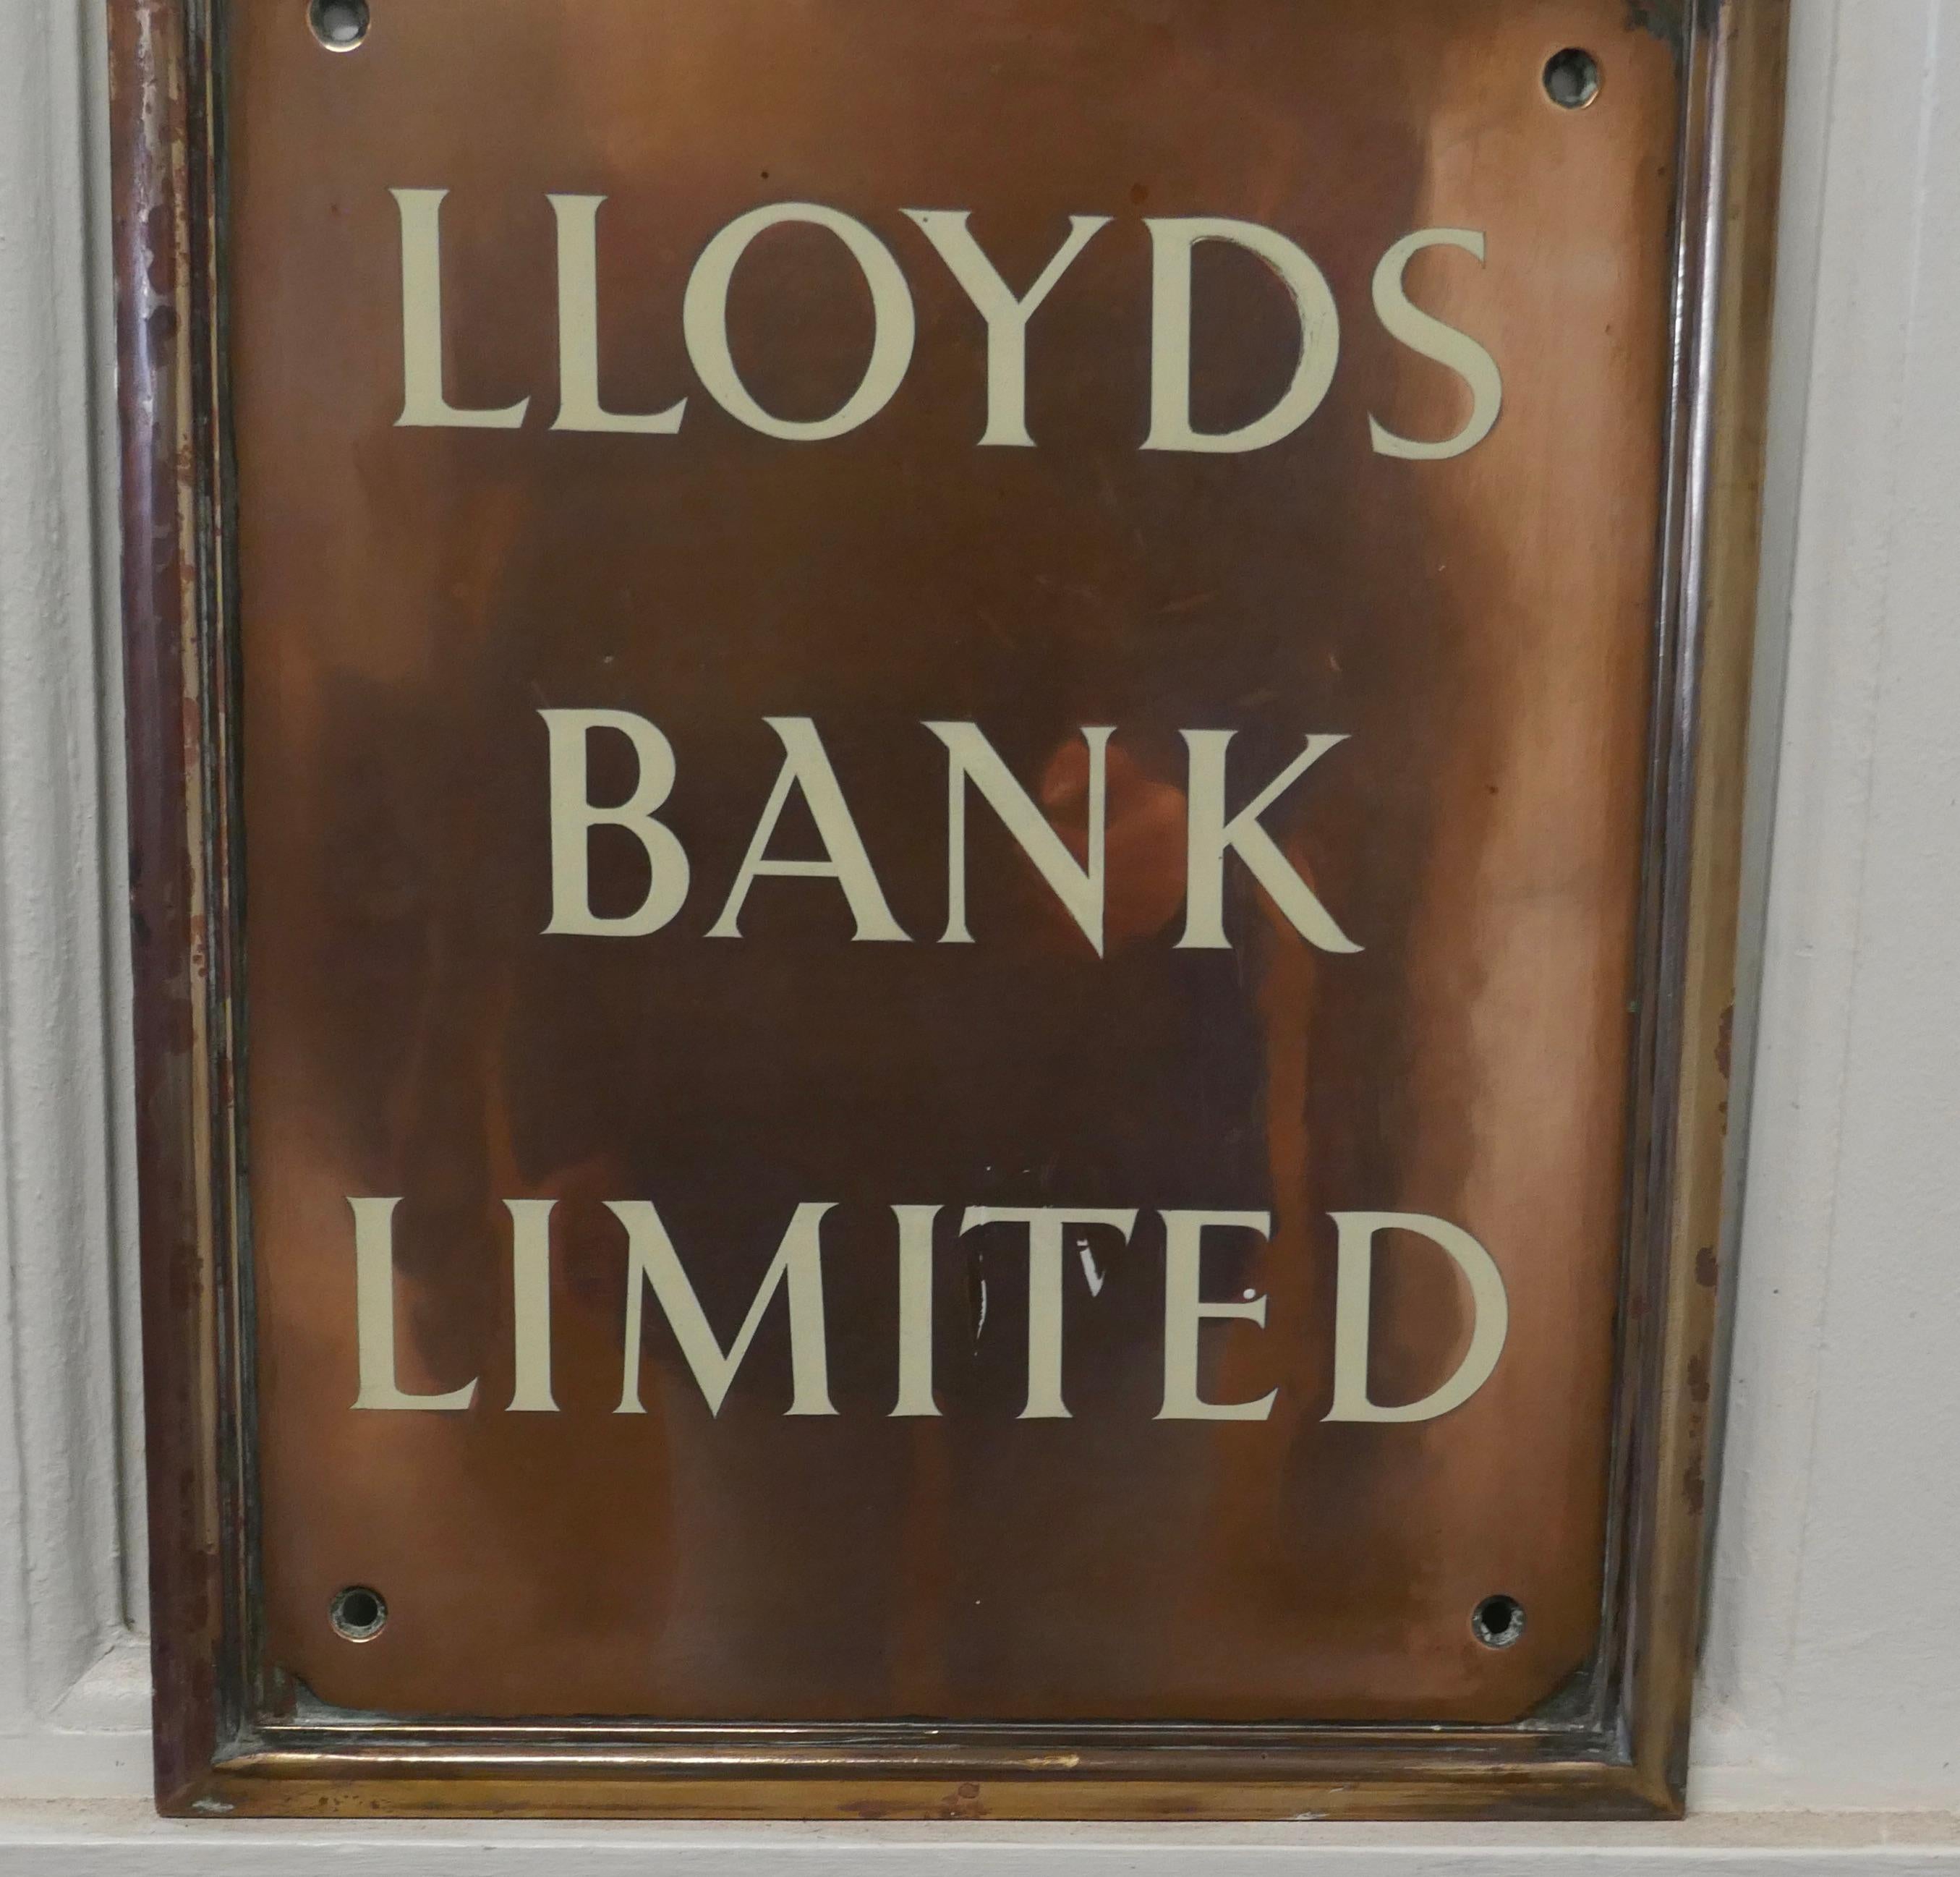 An Etched Copper Enamel Lloyds Bank Ltd Sign 

A Vintage Copper Enamel Lloyds Bank Ltd sign 
This is a lovely old sign it has inlaid enamel lettering 
The sign is very heavy and in very good condition for its age
AC70.